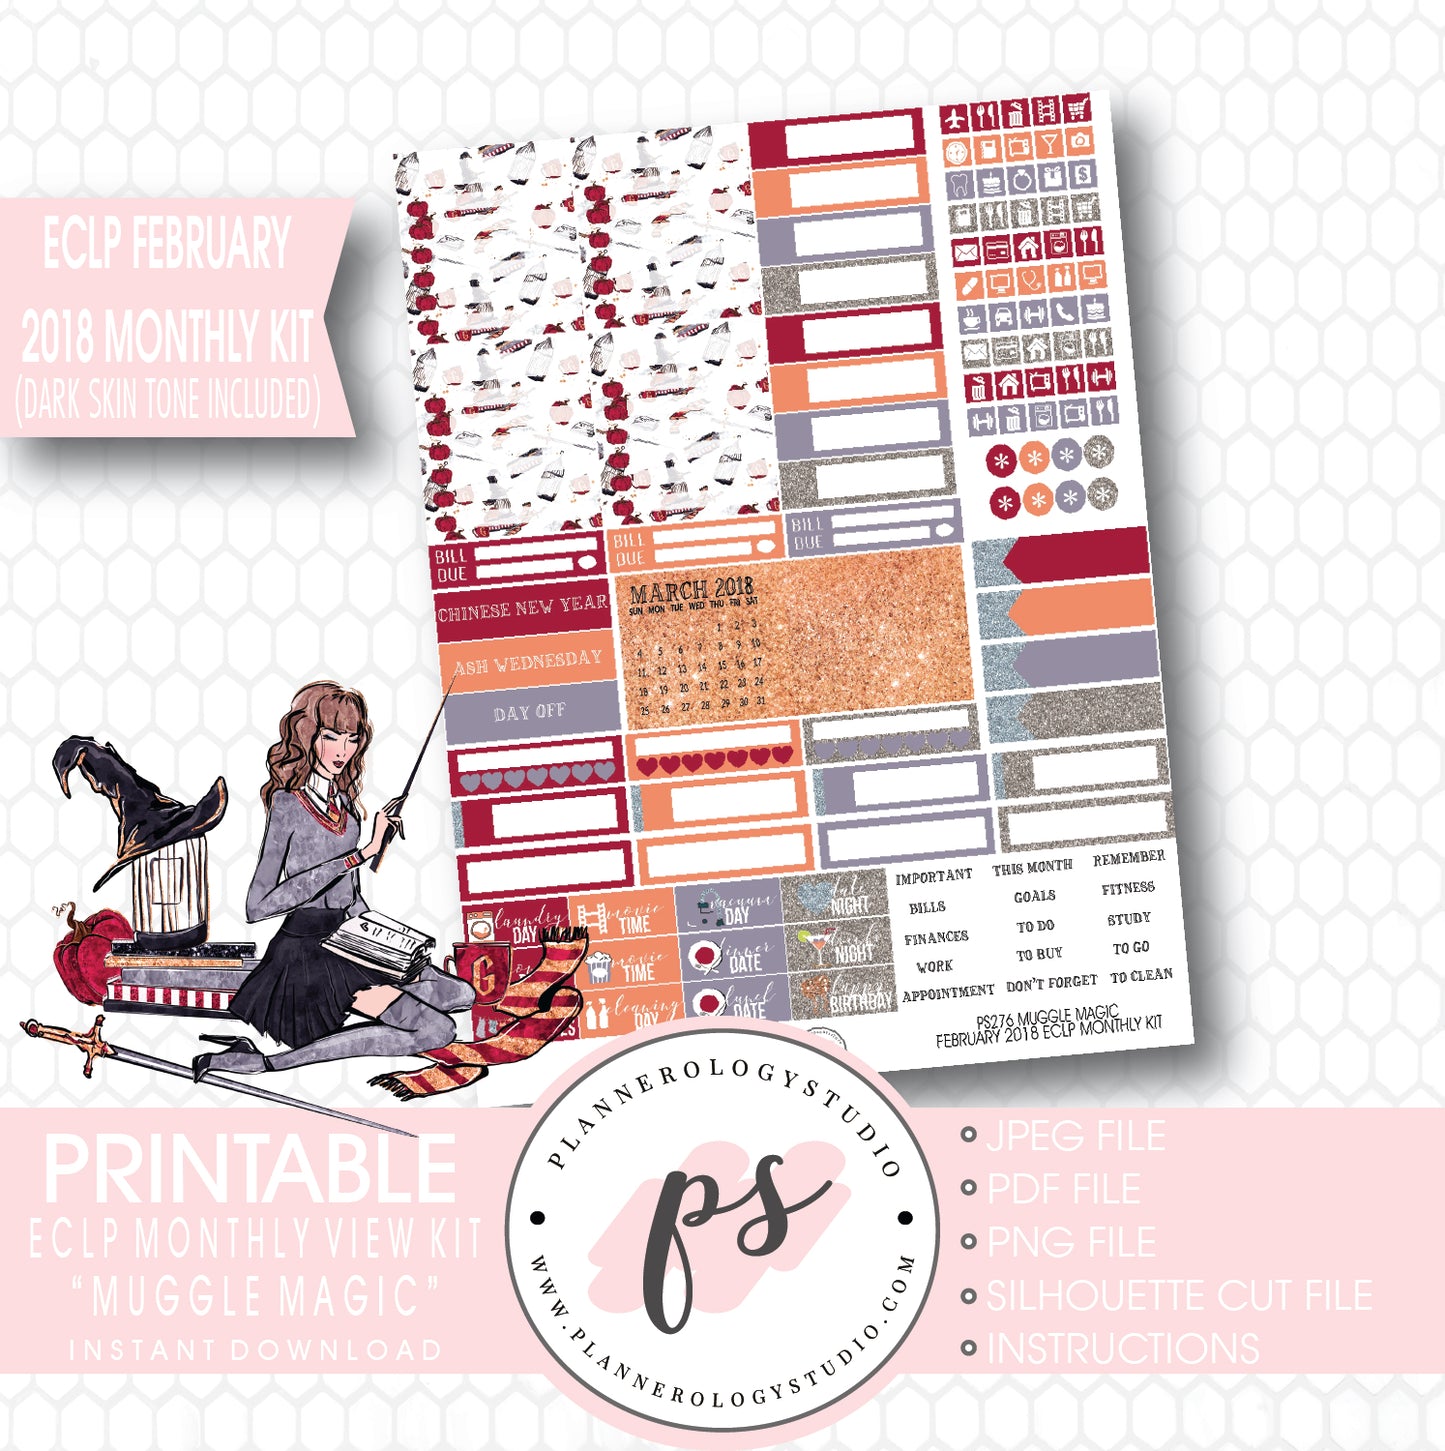 Muggle Magic (Harry Potter Theme) February 2018 Monthly View Kit Printable Planner Stickers (for use with ECLP) (Dark & Light Skin Tone) - Plannerologystudio